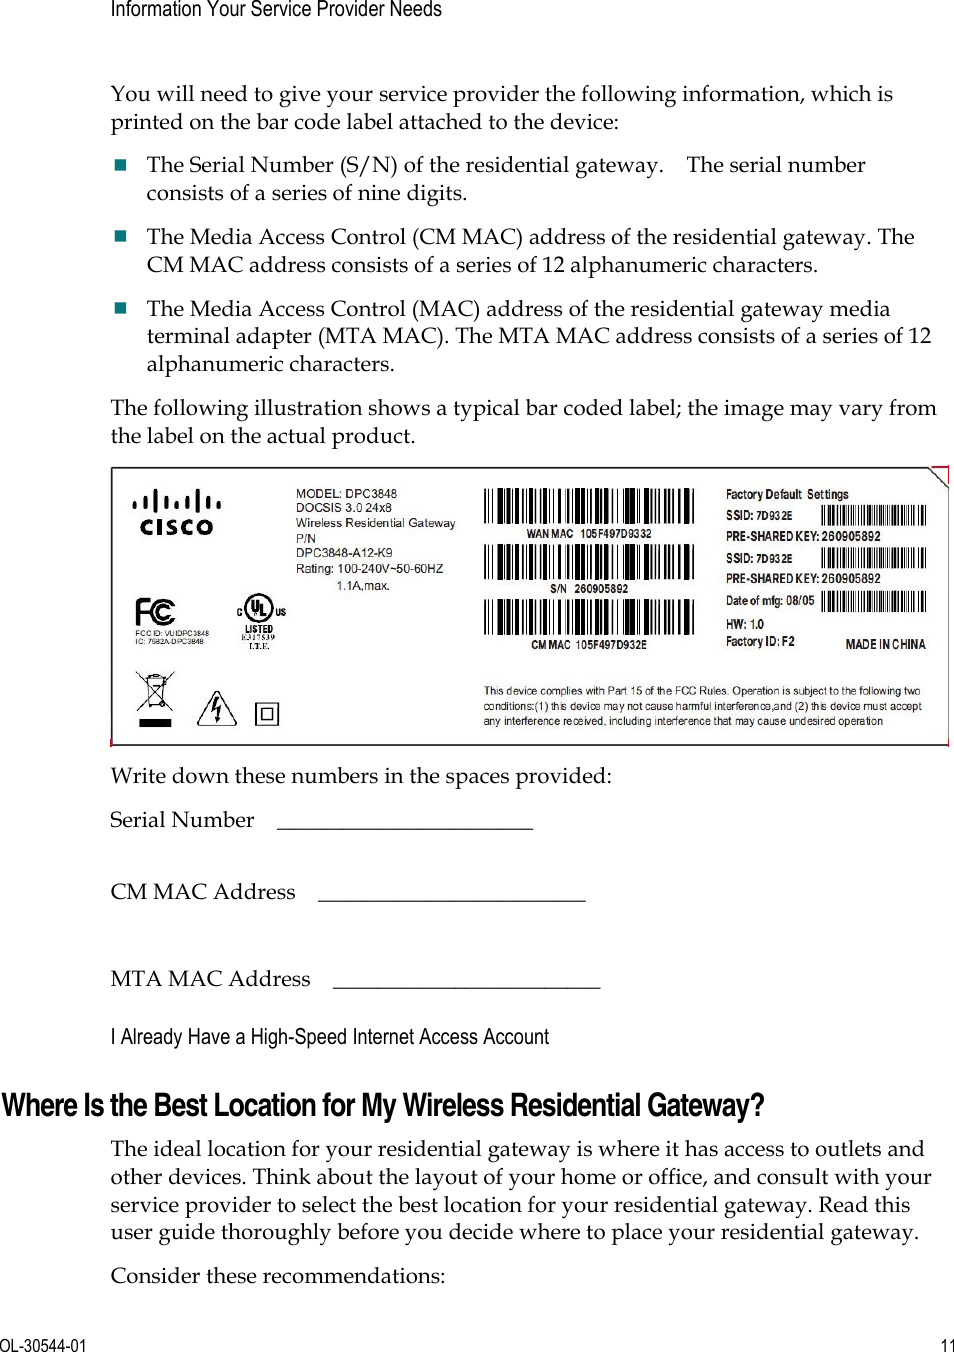      OL-30544-01  11  Information Your Service Provider Needs   You will need to give your service provider the following information, which is printed on the bar code label attached to the device: The Serial Number (S/N) of the residential gateway.    The serial number consists of a series of nine digits.   The Media Access Control (CM MAC) address of the residential gateway. The CM MAC address consists of a series of 12 alphanumeric characters.   The Media Access Control (MAC) address of the residential gateway media terminal adapter (MTA MAC). The MTA MAC address consists of a series of 12 alphanumeric characters.   The following illustration shows a typical bar coded label; the image may vary from the label on the actual product.  Write down these numbers in the spaces provided: Serial Number  _______________________    CM MAC Address    ________________________  MTA MAC Address    ________________________  I Already Have a High-Speed Internet Access Account Where Is the Best Location for My Wireless Residential Gateway? The ideal location for your residential gateway is where it has access to outlets and other devices. Think about the layout of your home or office, and consult with your service provider to select the best location for your residential gateway. Read this user guide thoroughly before you decide where to place your residential gateway. Consider these recommendations: 